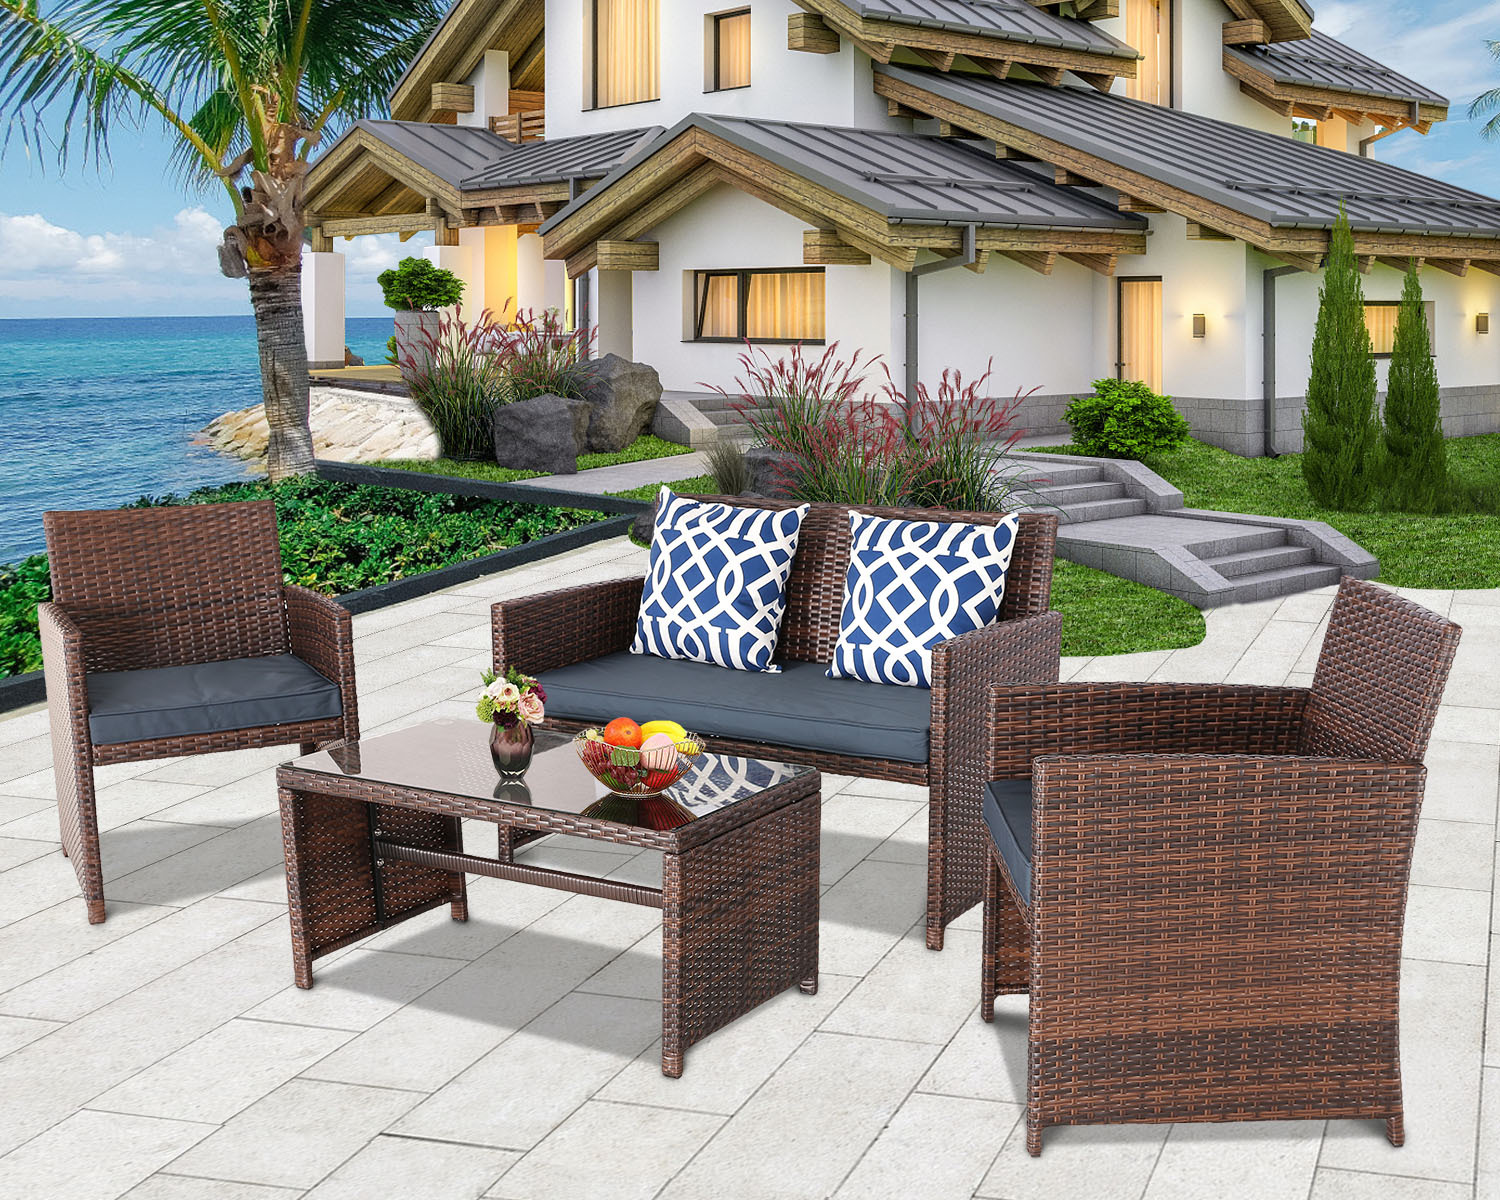 4 Pieces Outdoor Patio Furniture Sets All Weather Wicker Chairs Set With Coffee Table And Chair Set For Backyard Porch Poolside Patio Seating Set 1637380113004 0 